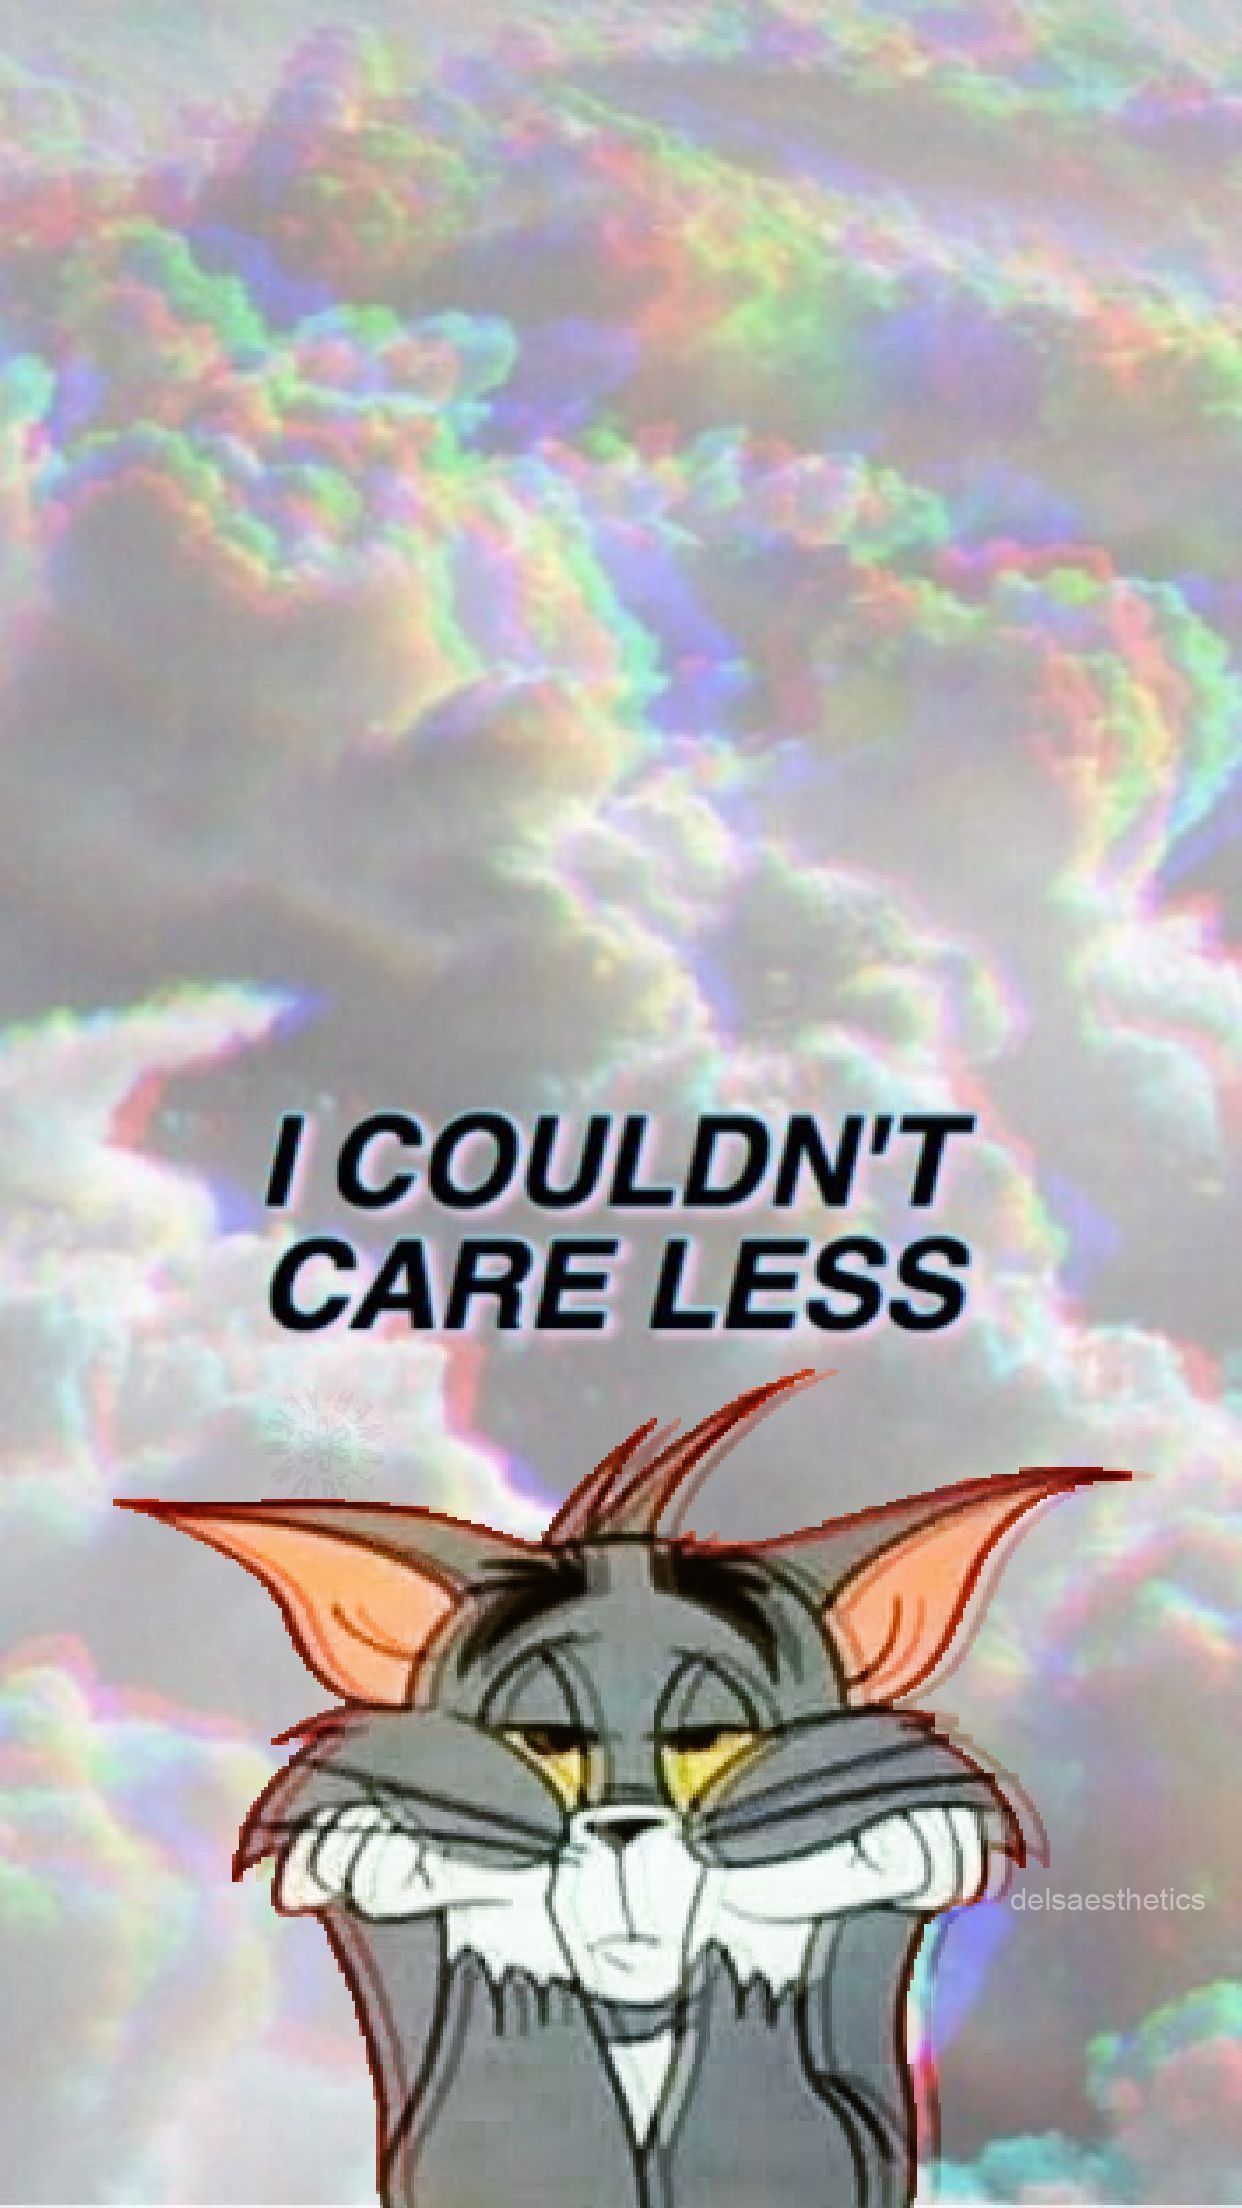 I couldn't care less - Tom and Jerry